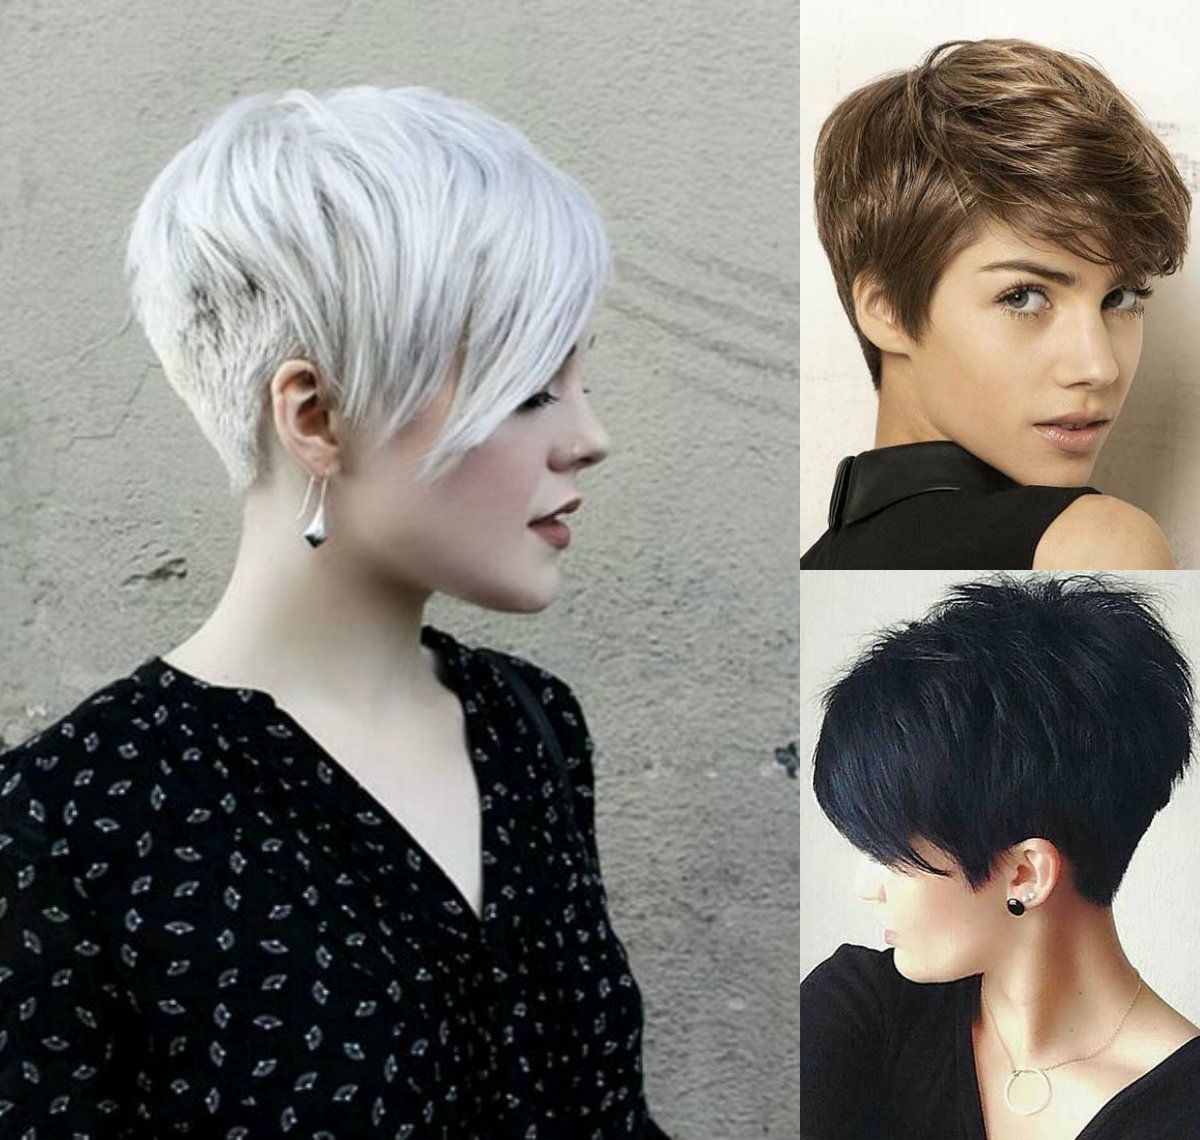 Vibrant Layered Pixie Haircuts 2017 | Hairdrome Pertaining To Recent Crop Pixie Hairstyles (View 4 of 15)